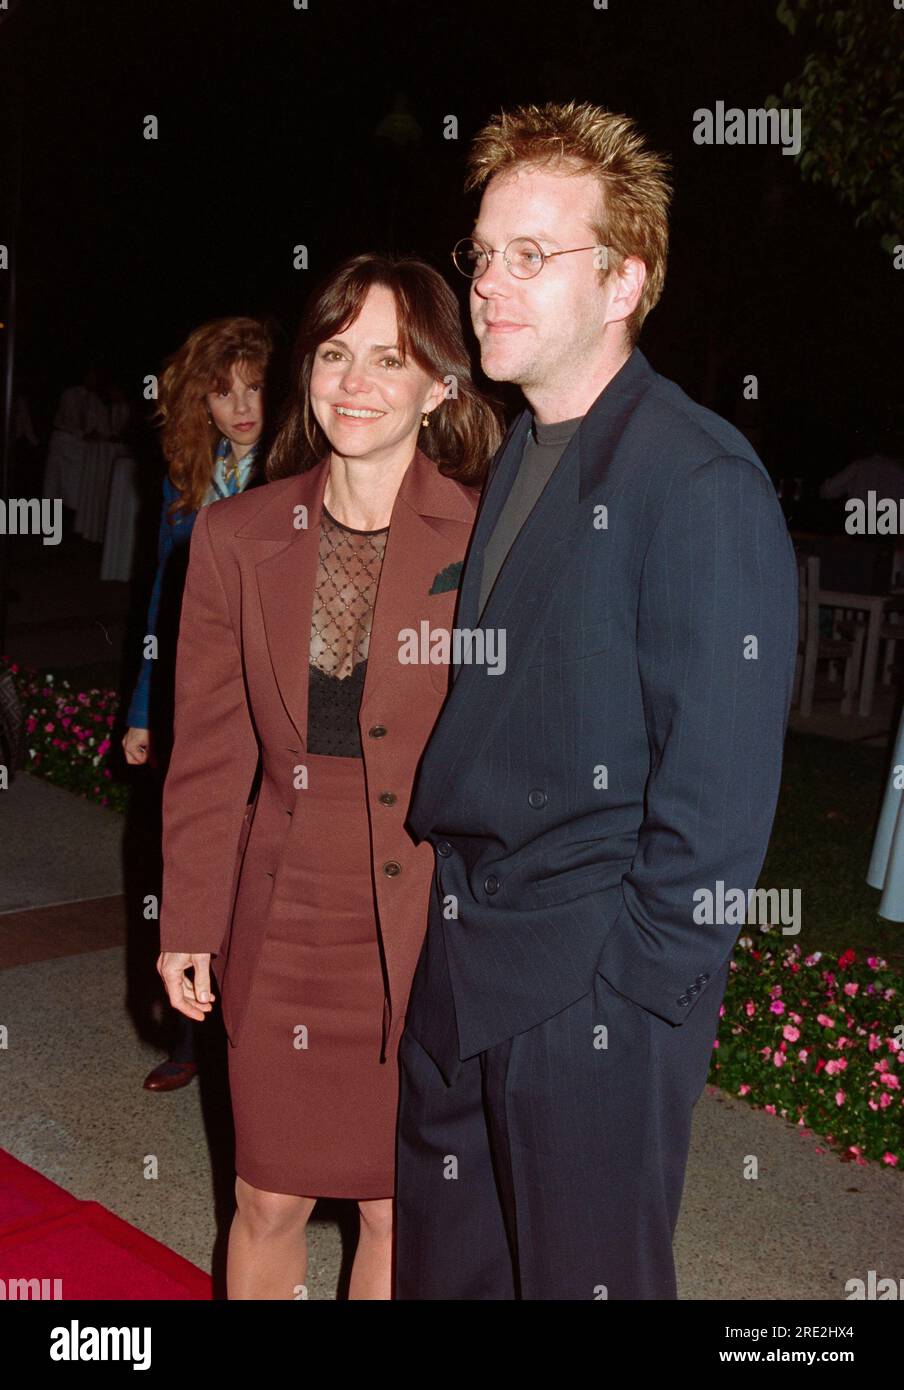 ARCHIVE: LOS ANGELES, CA. January 11, 1996: Actress Sally Field & actor Kiefer Sutherland at the premiere of “Eye for an Eye.” Picture: Paul Smith / Featureflash Stock Photo